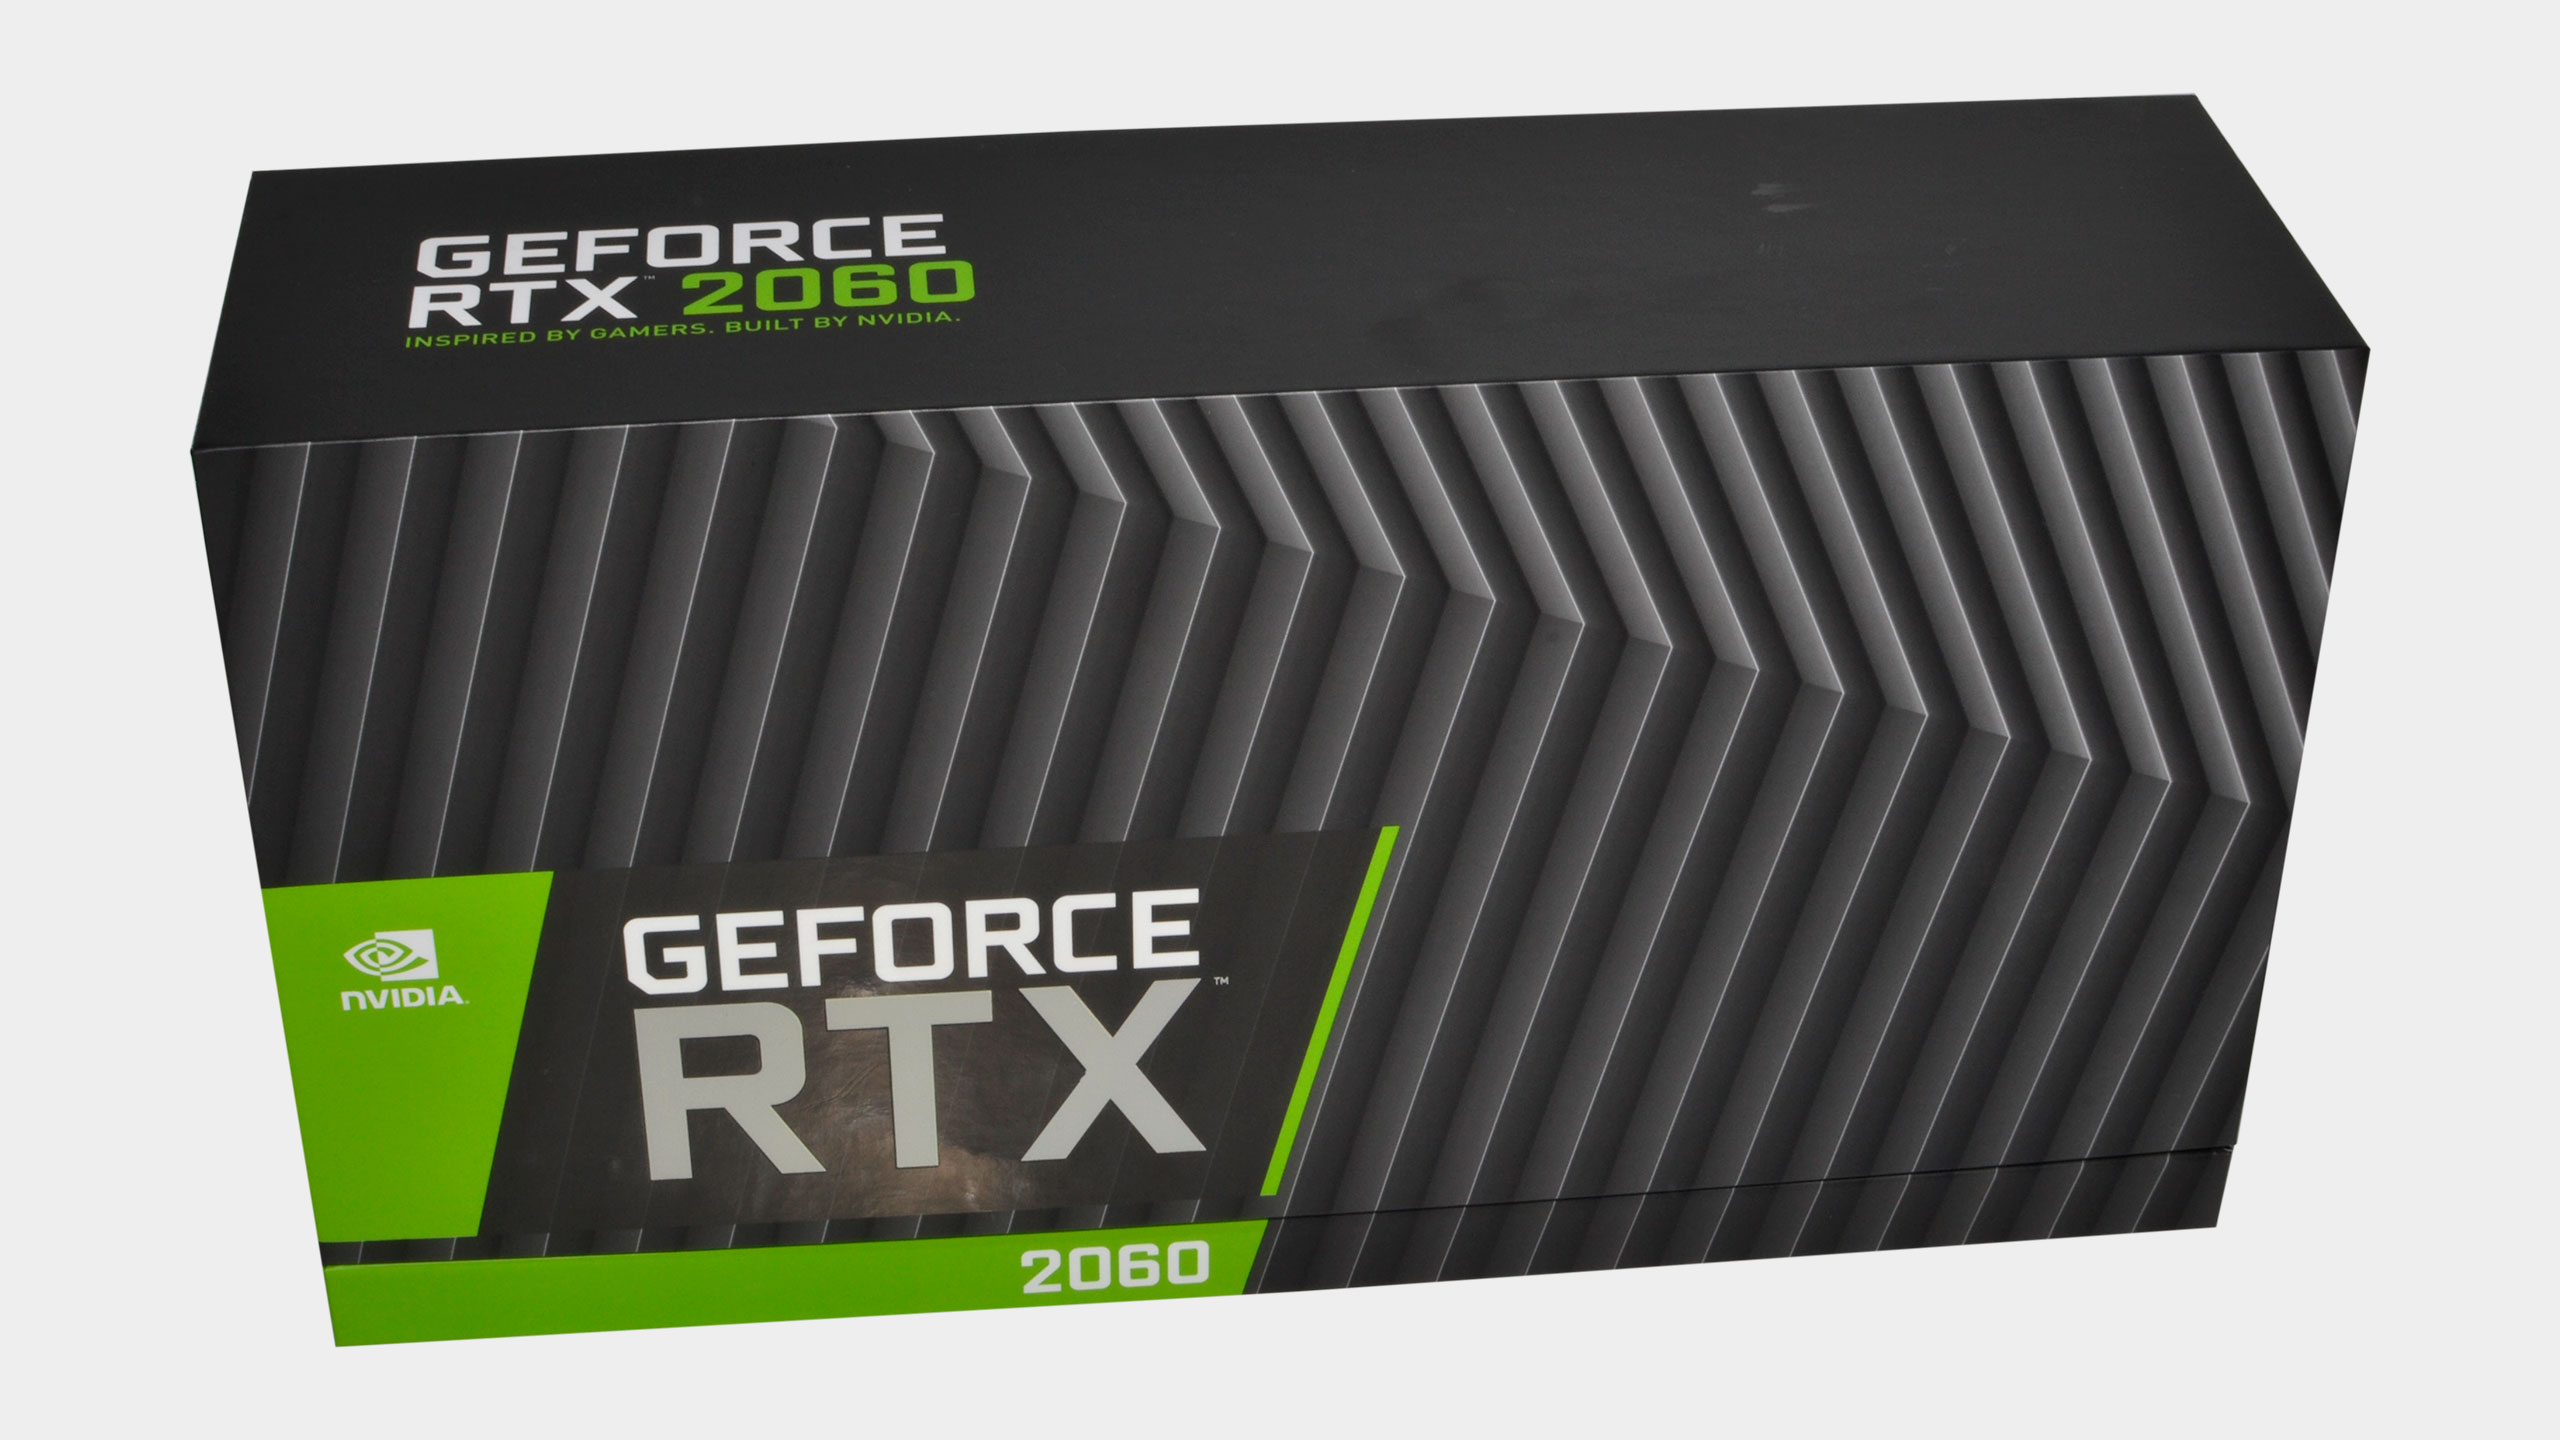 Nvidia GeForce RTX 2060 Review price, performance, specs, and | PC Gamer